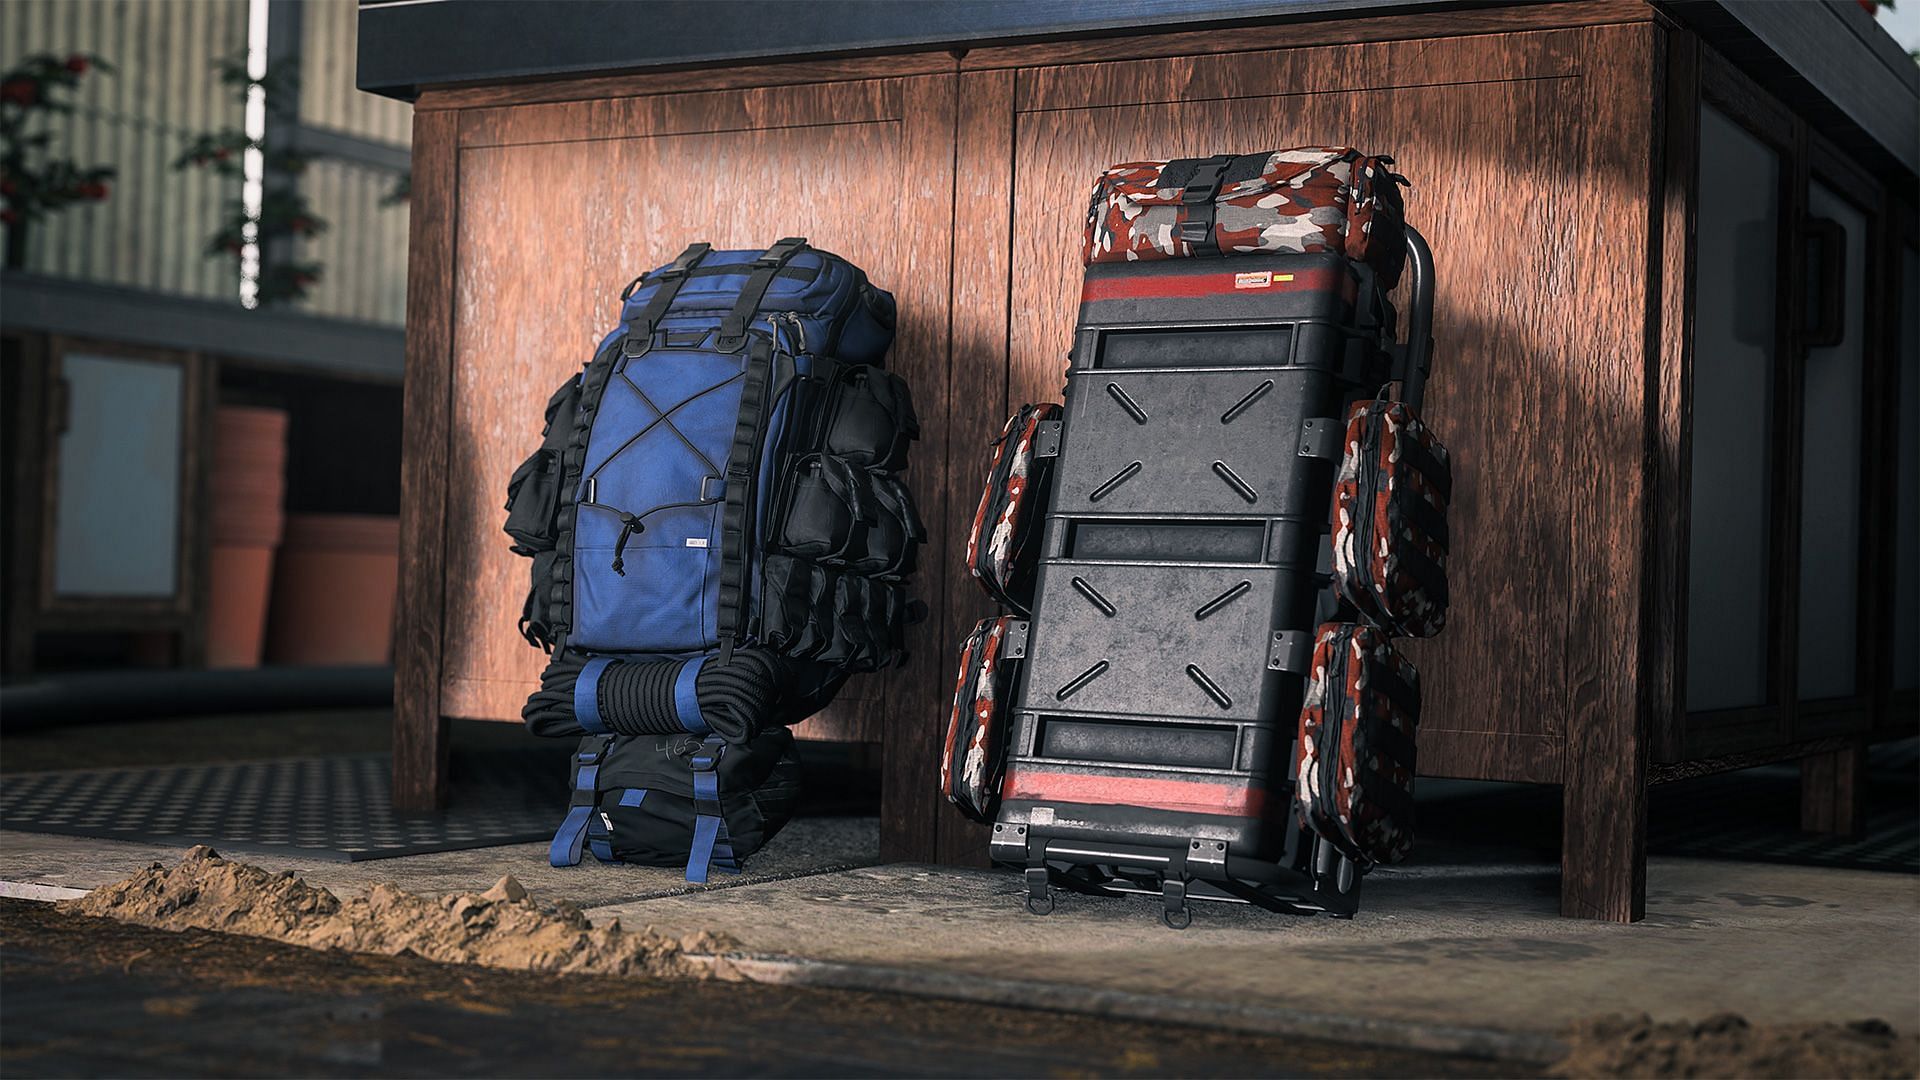 The new Scavenger and Secured DMZ Backpacks that can be obtained through Barter at Buy Stations in Warzone 2 (Image via Activision)